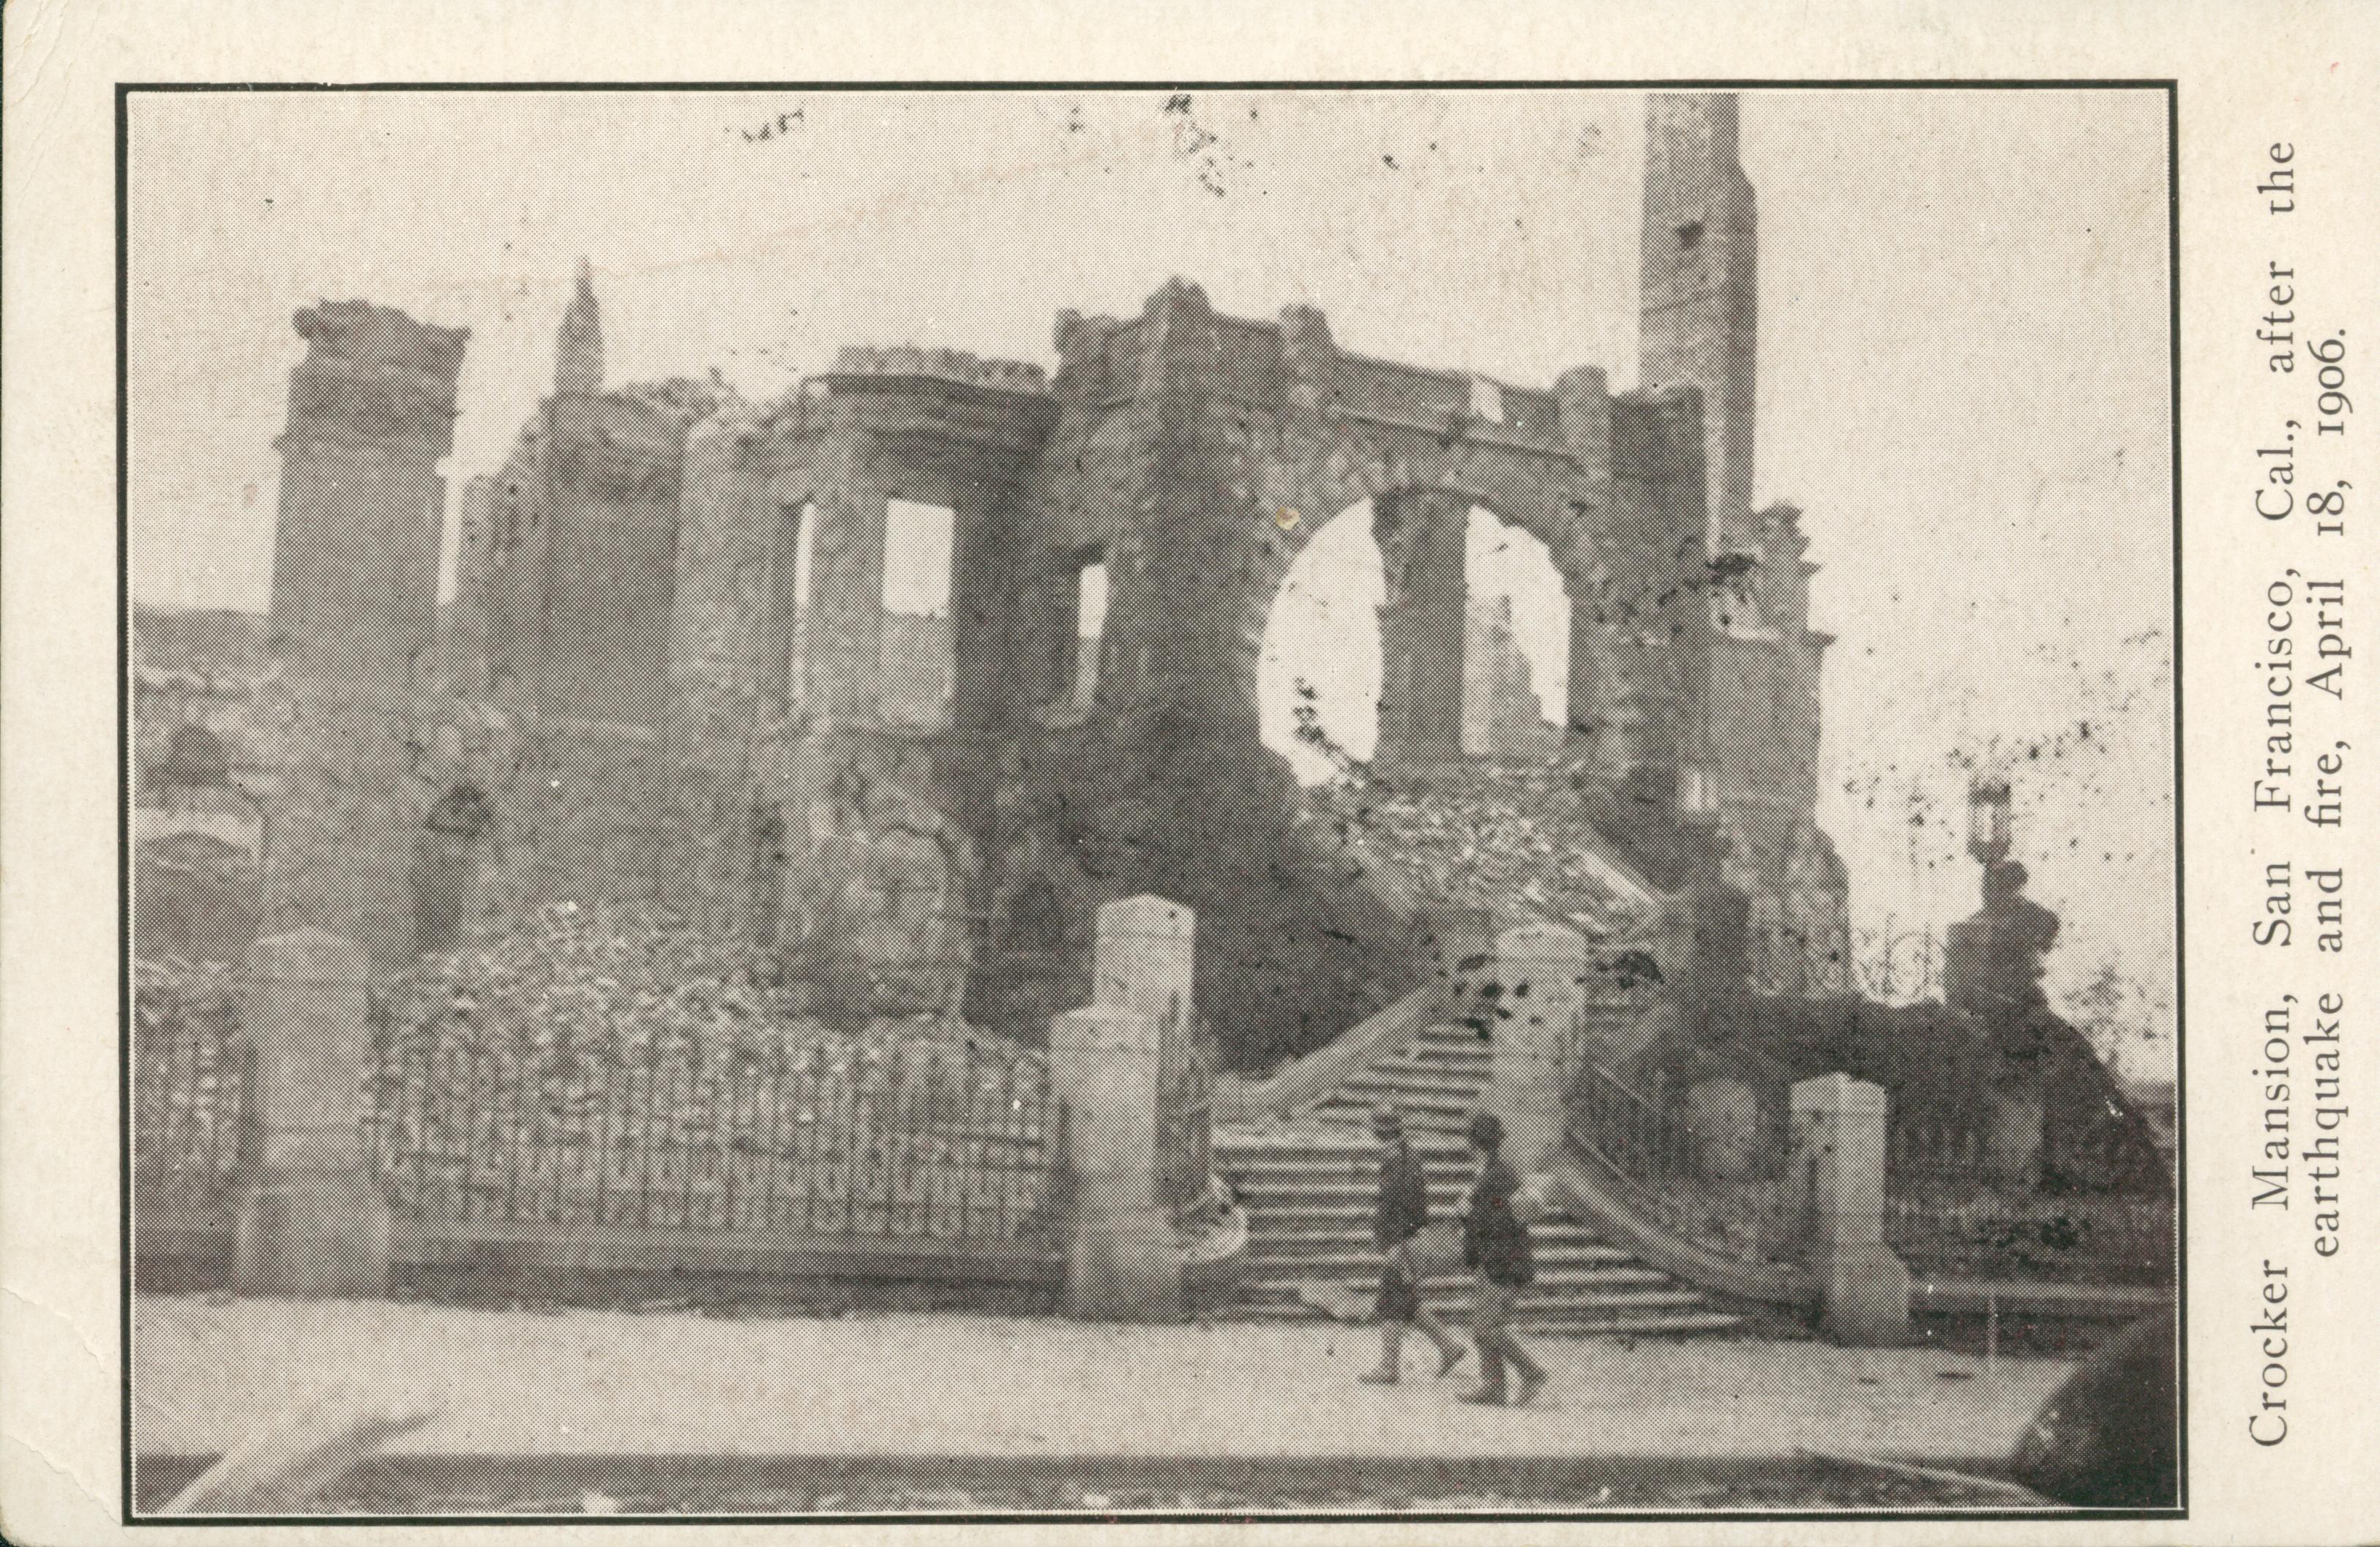 Shows the ruins of the Crocker Mansion after the earthquake